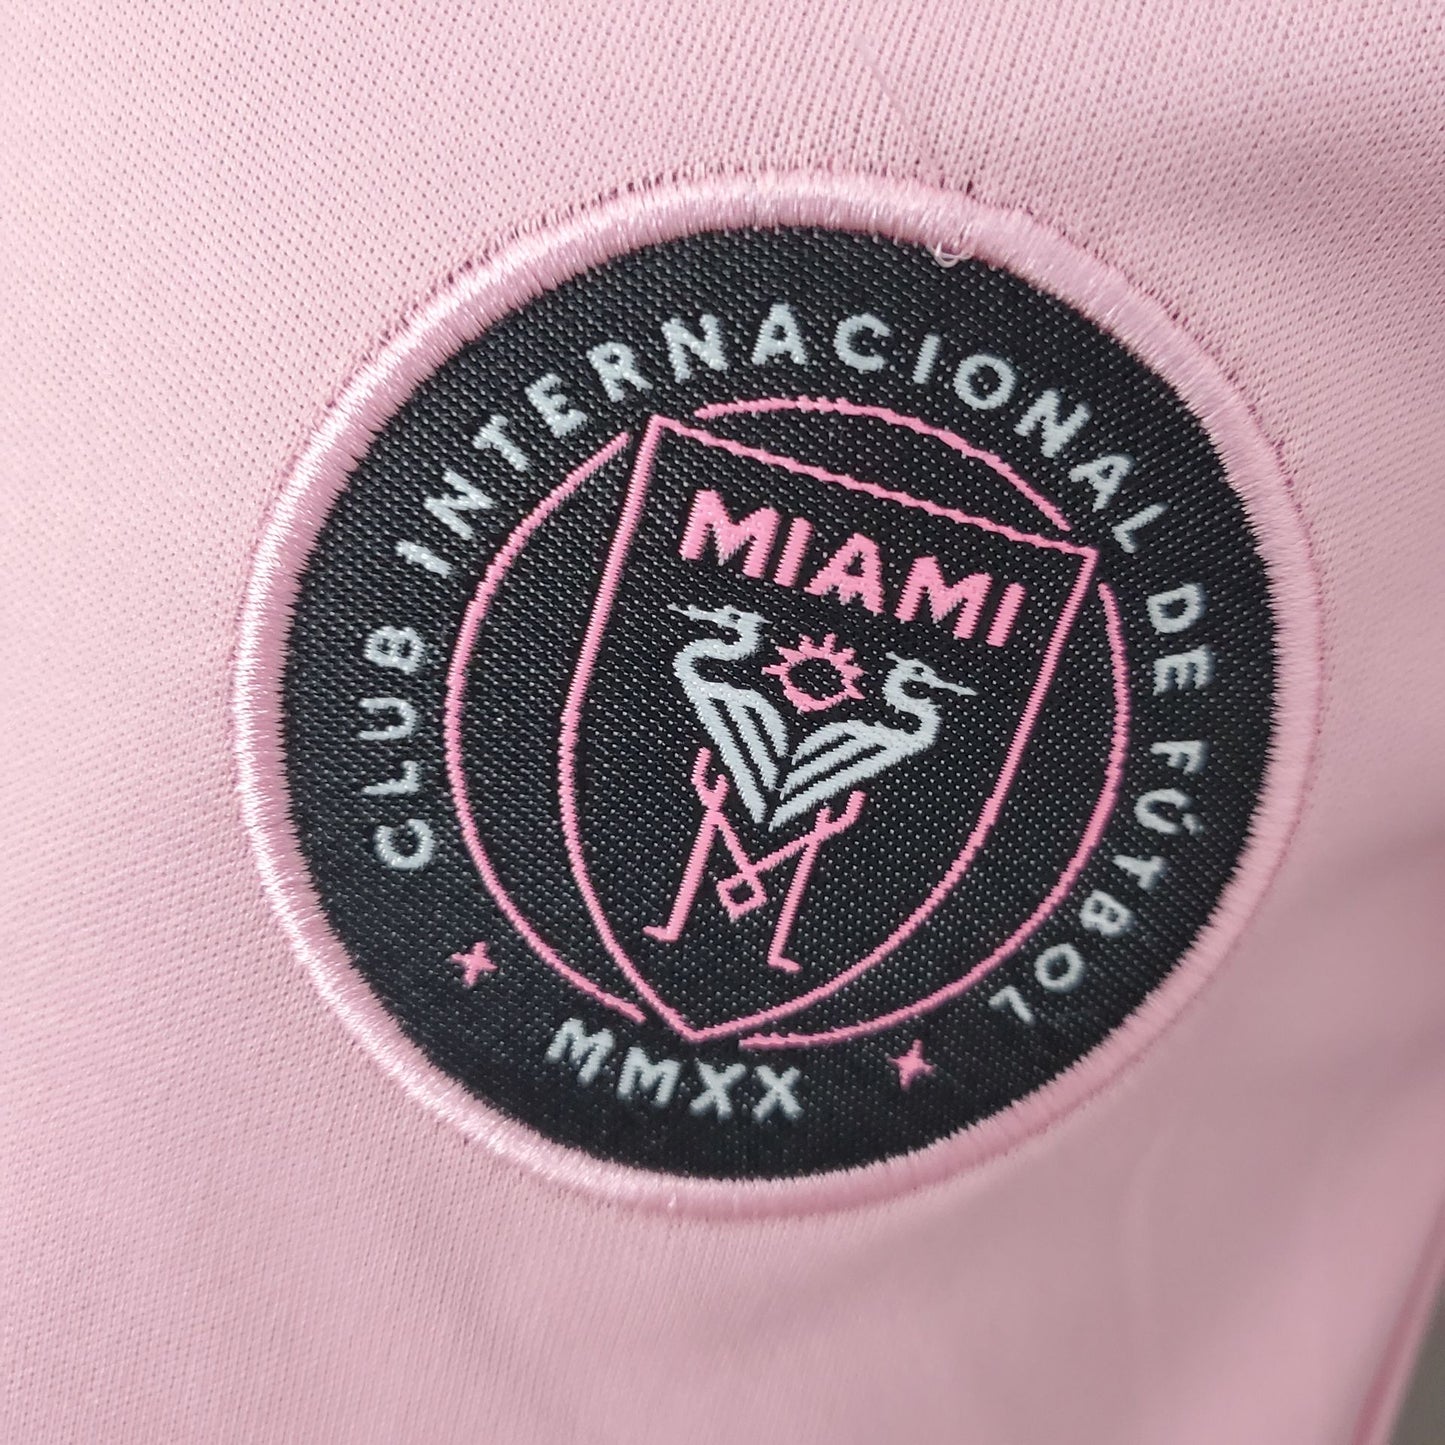 Youth Inter Miami CF Lionel Messi Pink 2023 Jersey